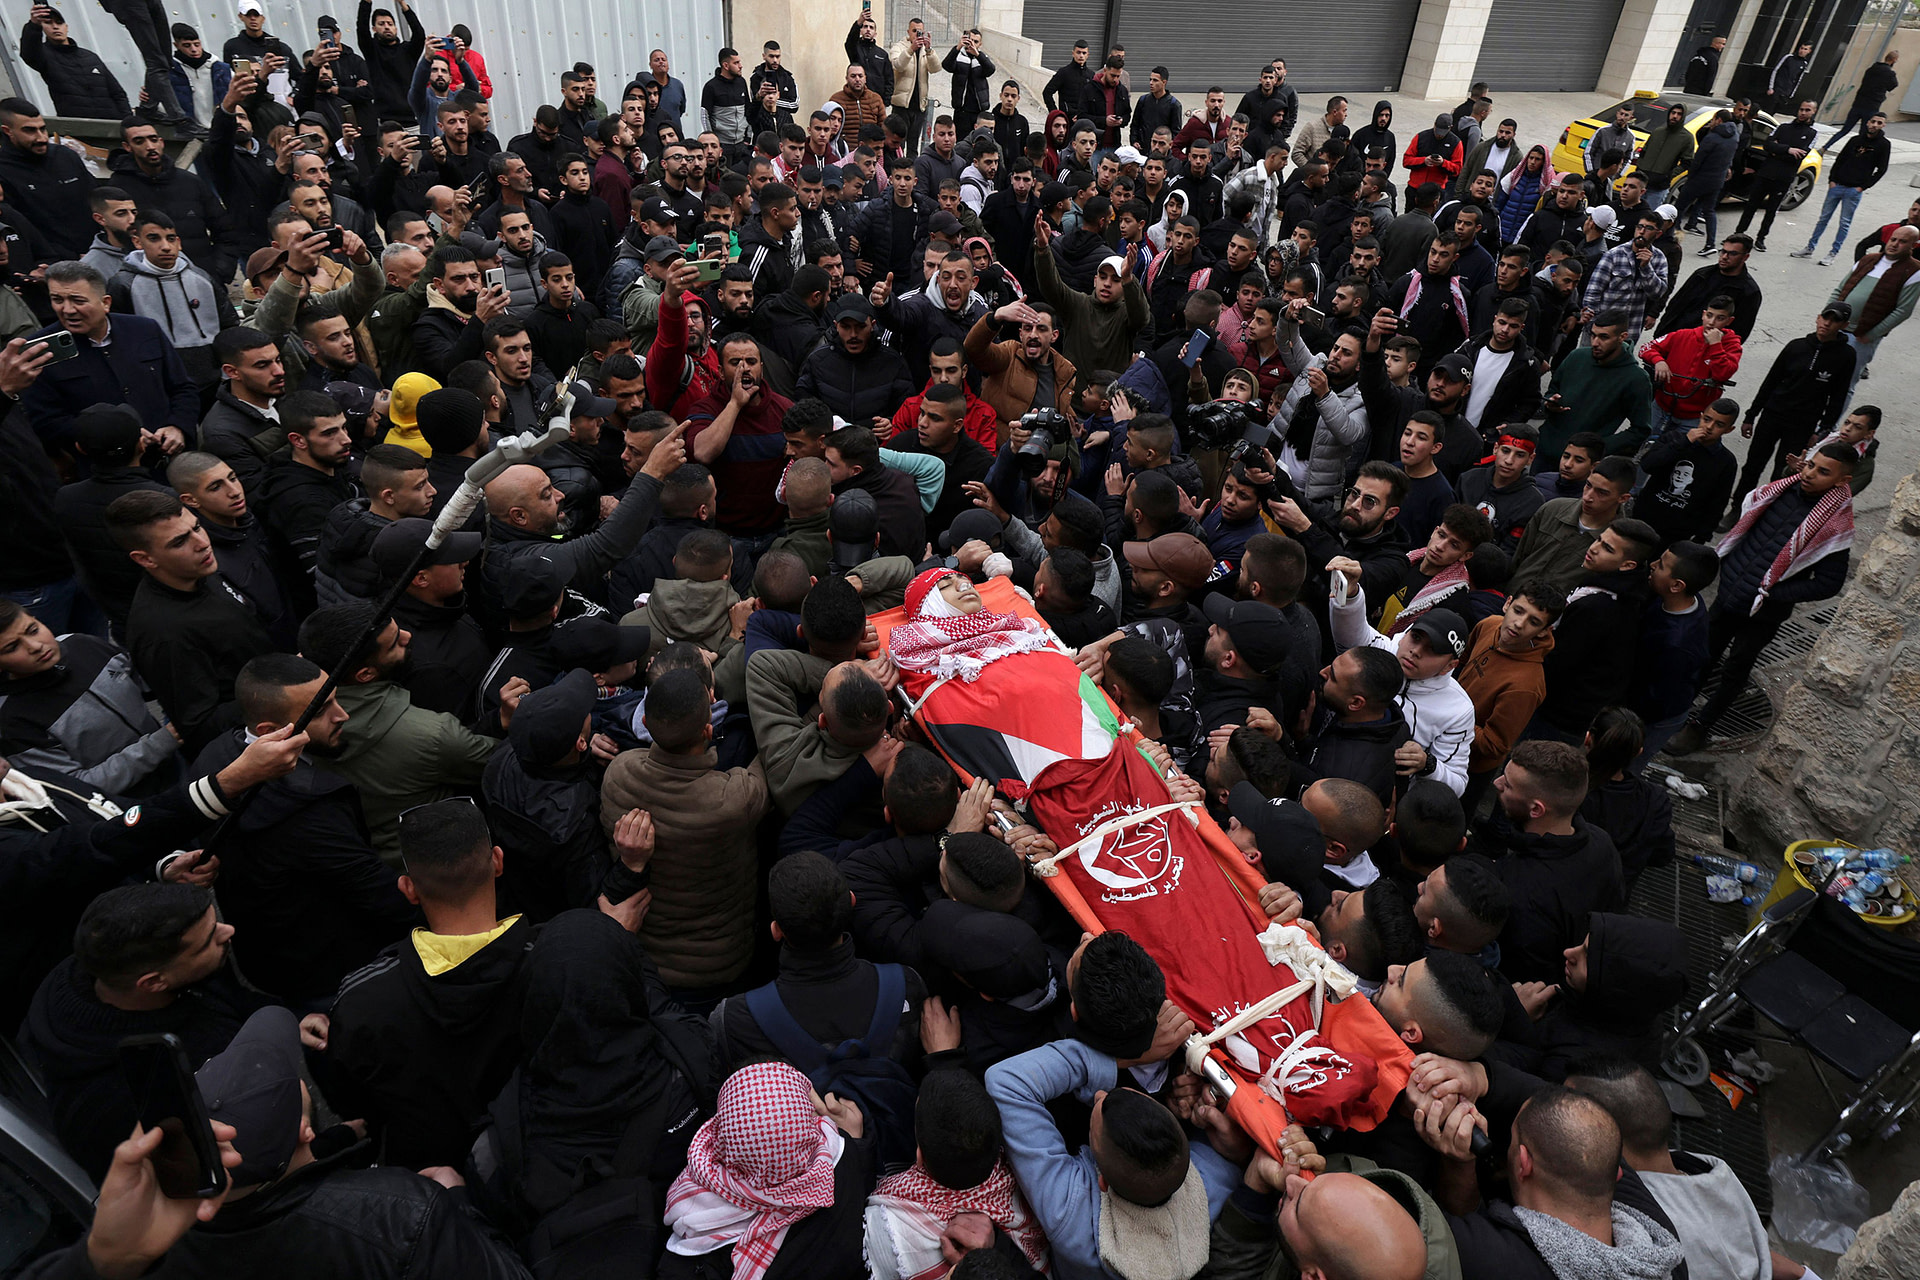 Funeral for Palestinian boy killed during Israeli raid highlights growing tensions